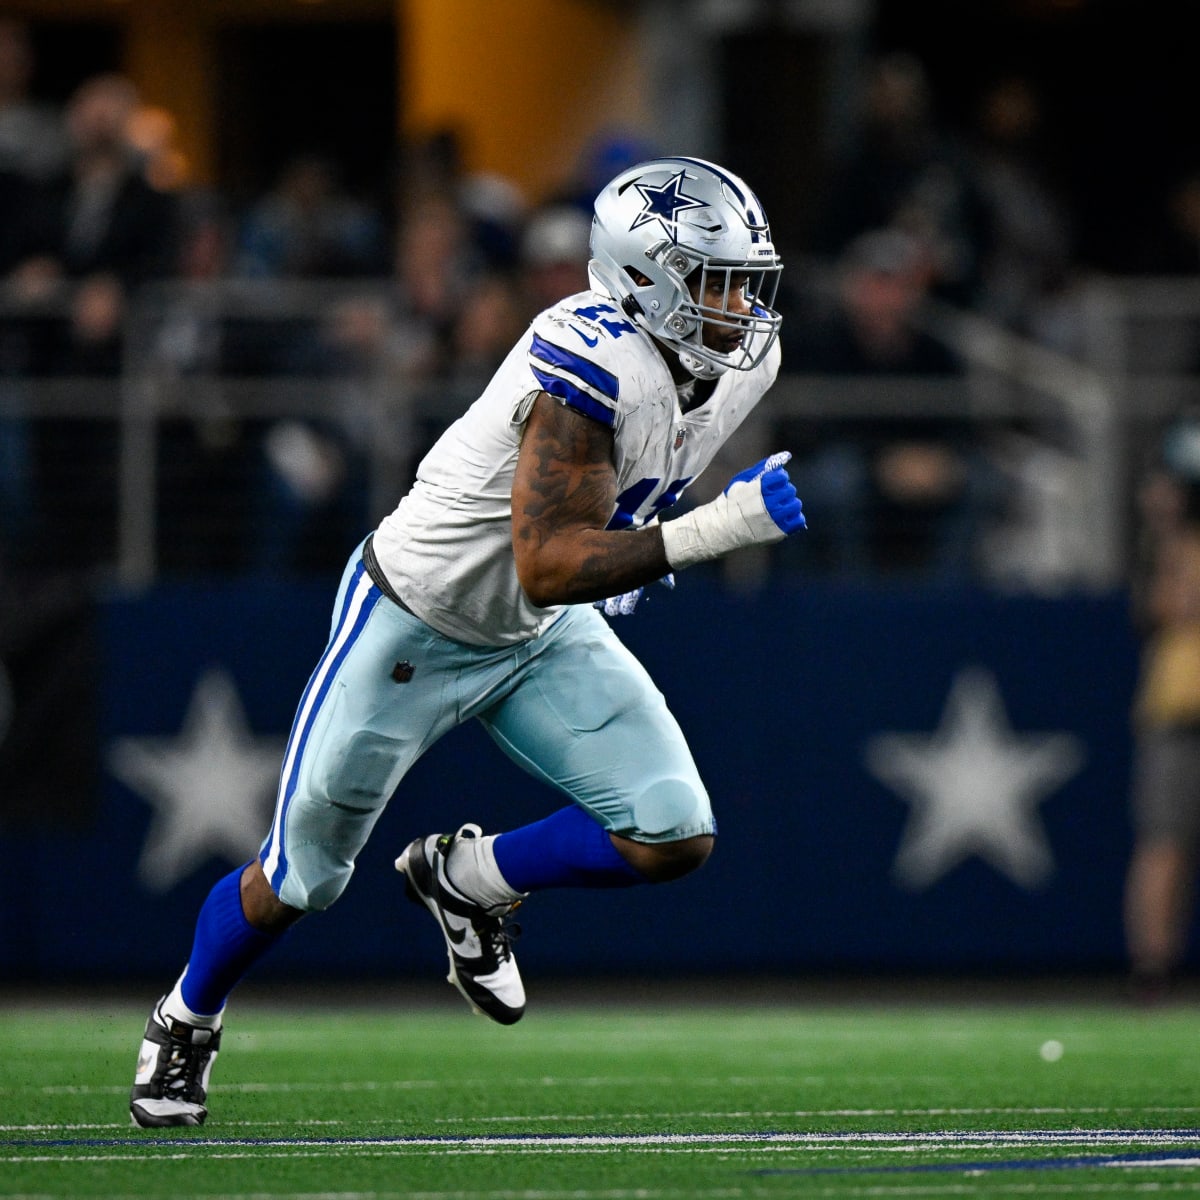 Cowboys vs 49ers Preview, Prediction, Injury Report, Micah Parsons